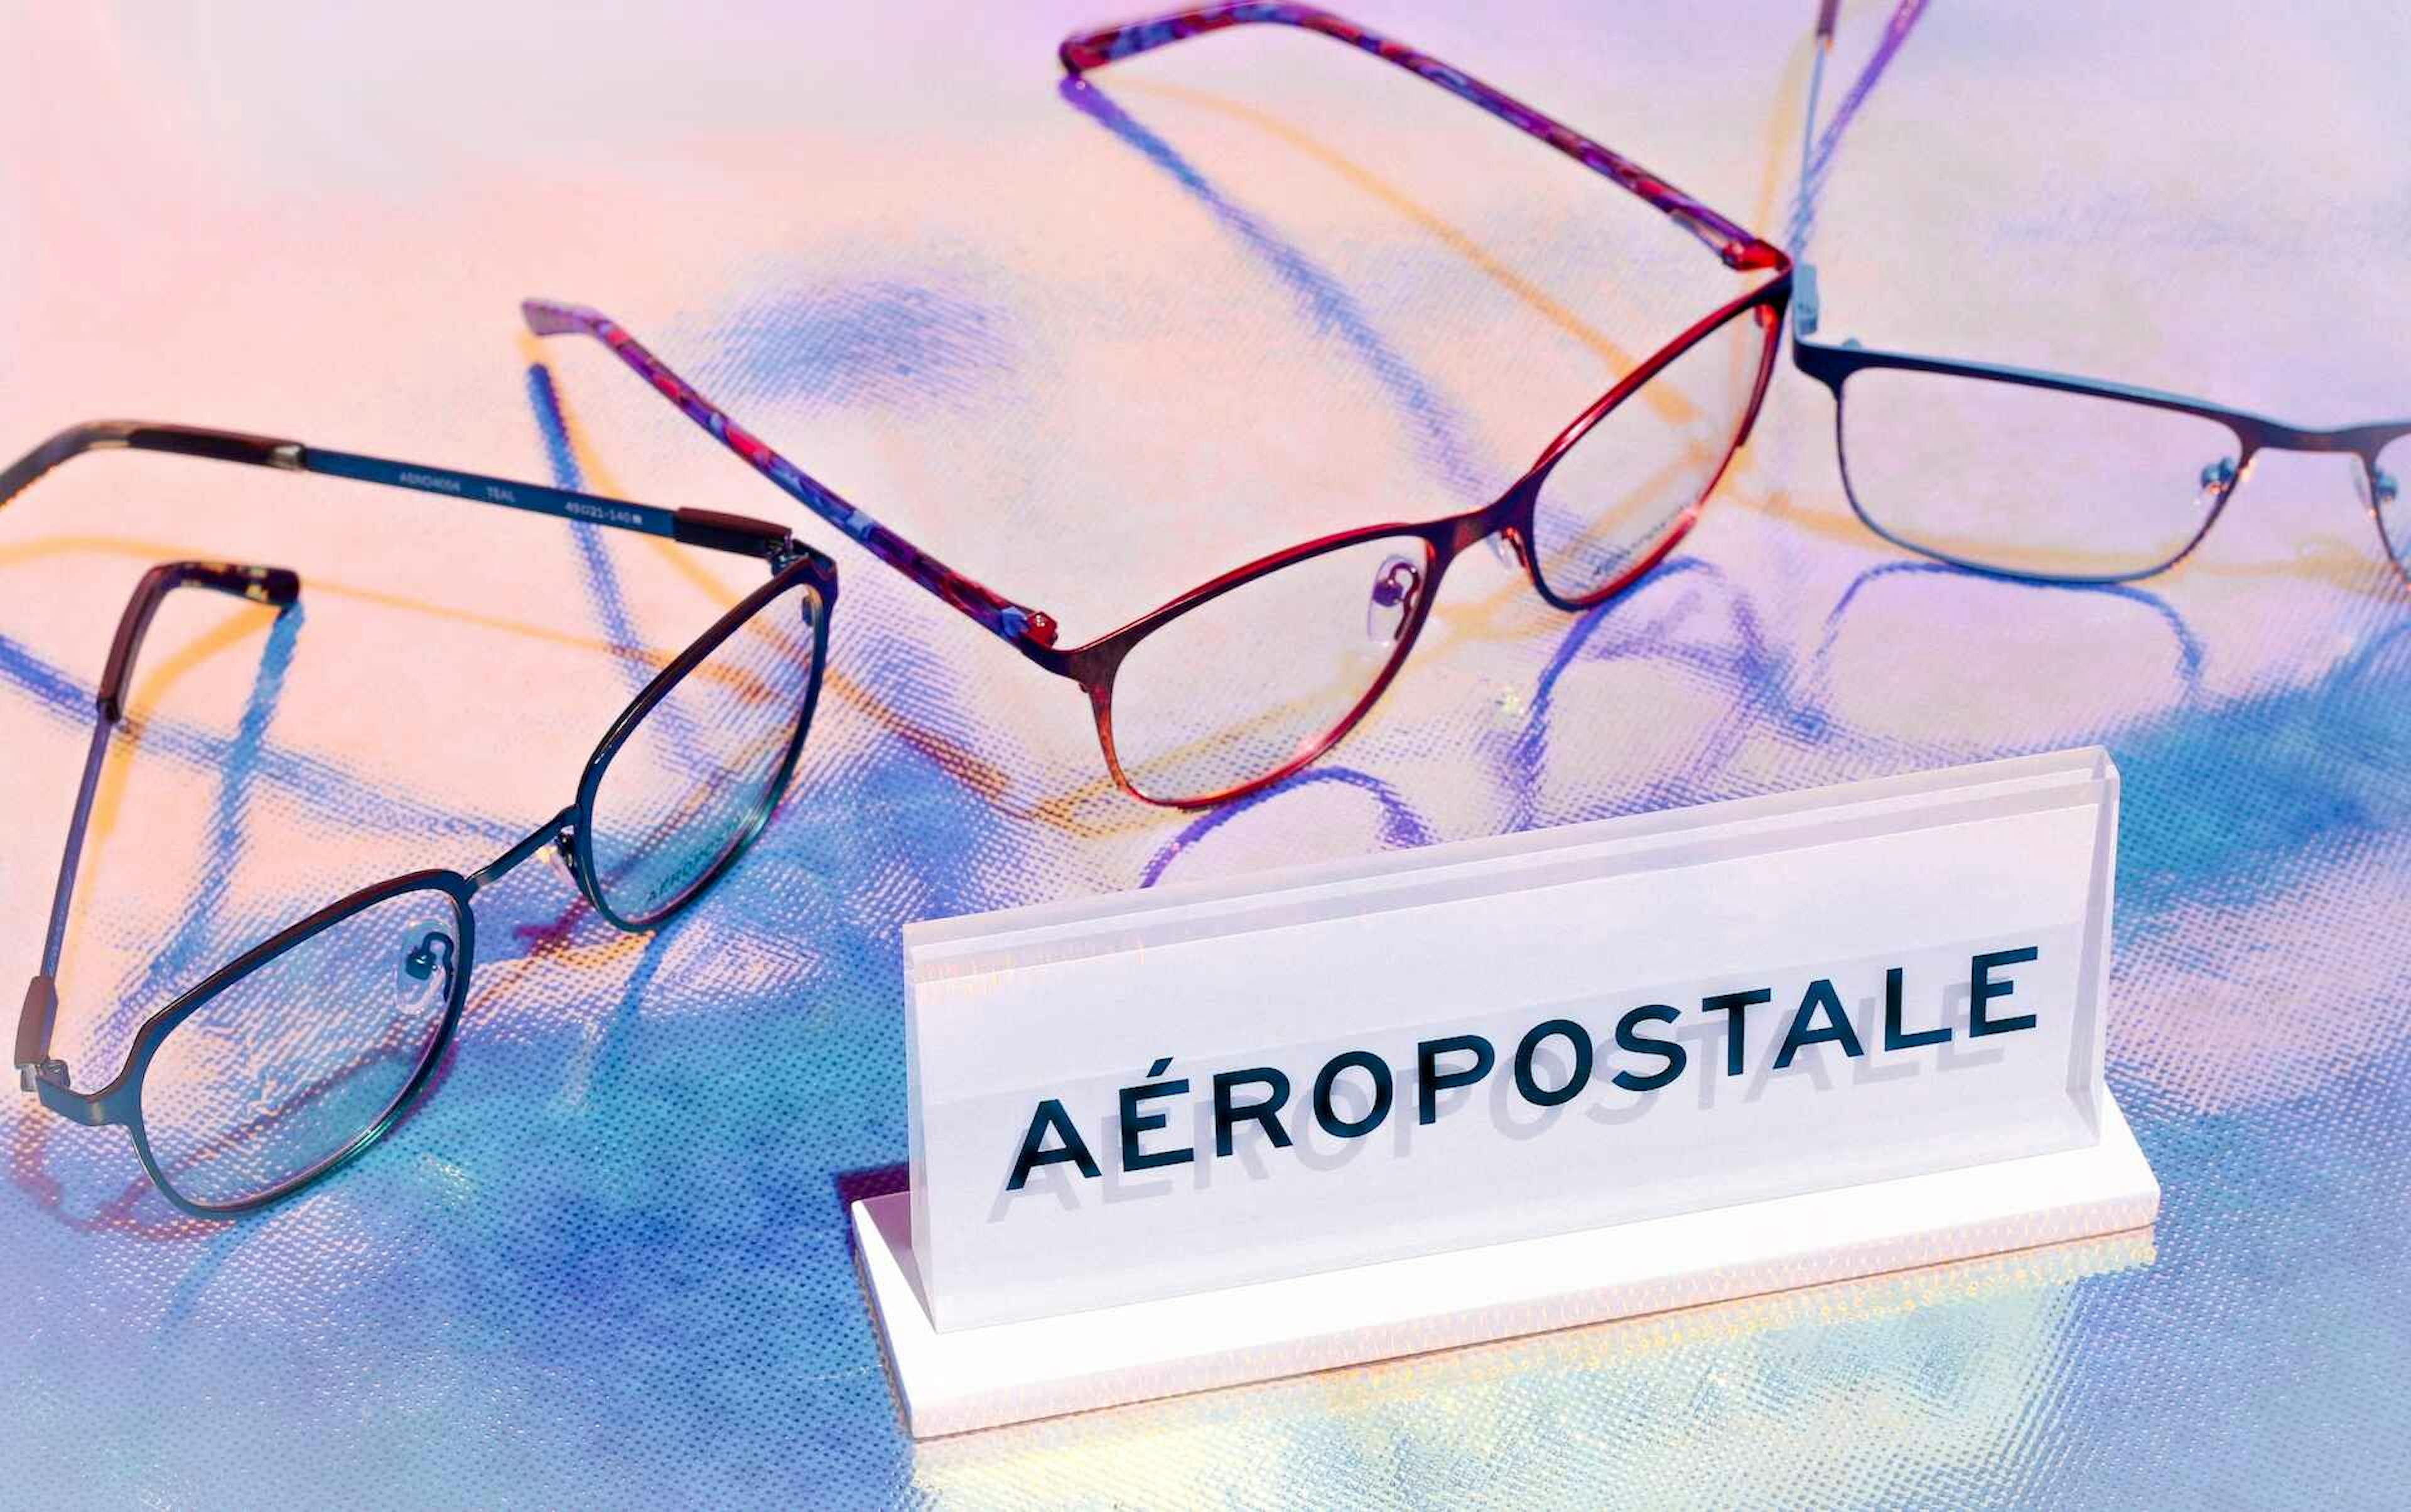 Three colorful Aéropostale eyeglass frames on an iridescent background with the Aéropostale placque